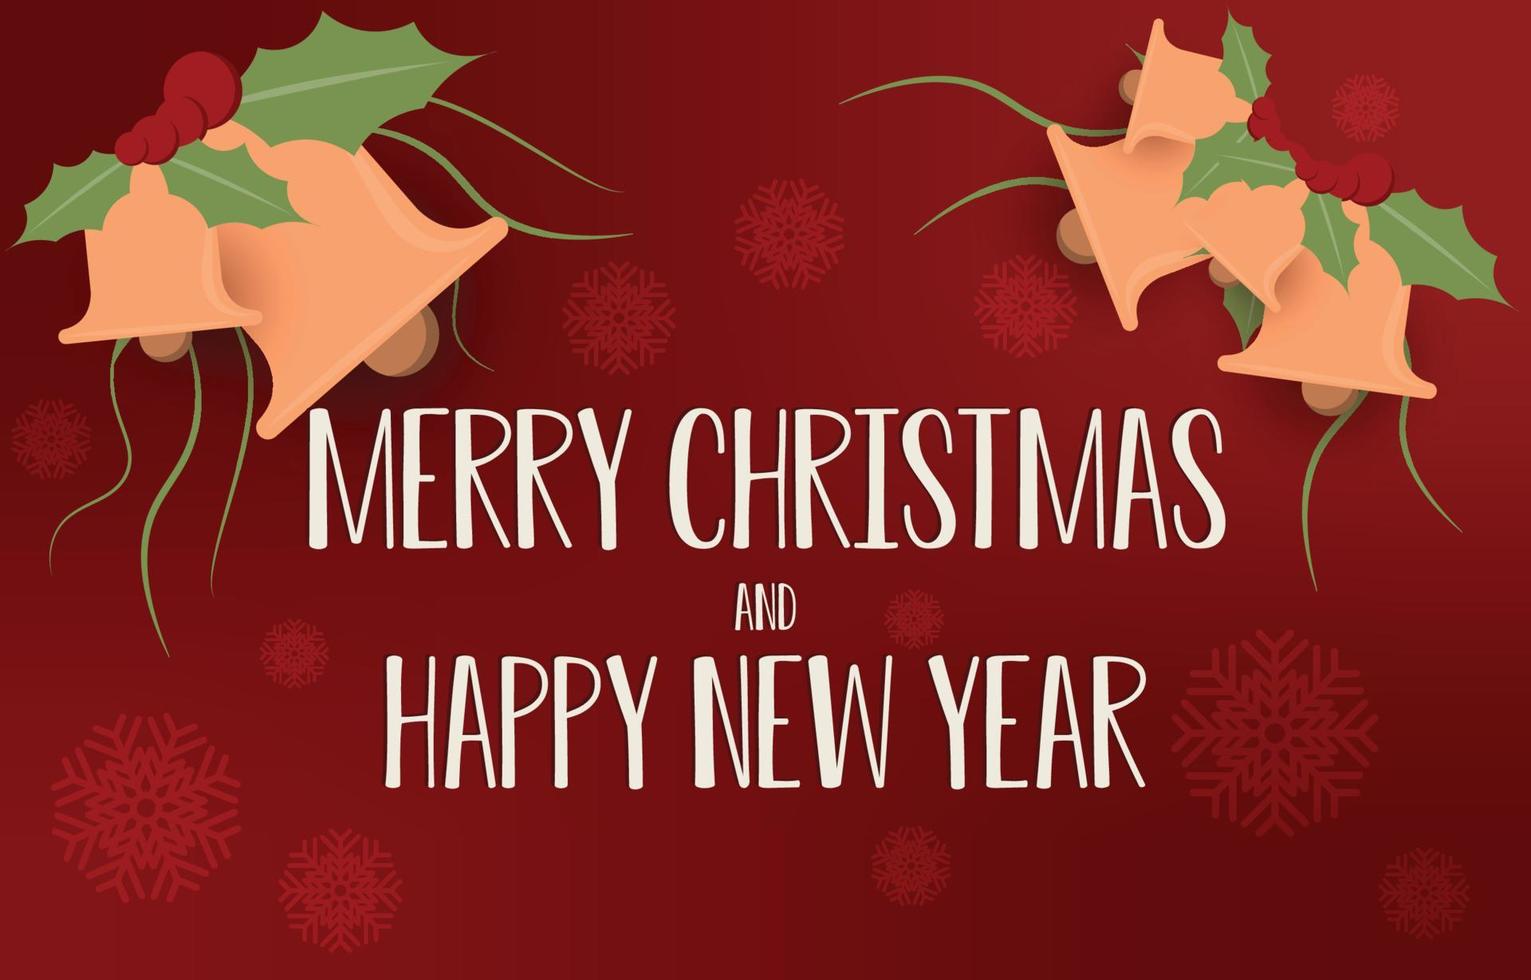 Christmas Background Vector with with Merry Christmas message and happy new year for wallpaper or greeting cards